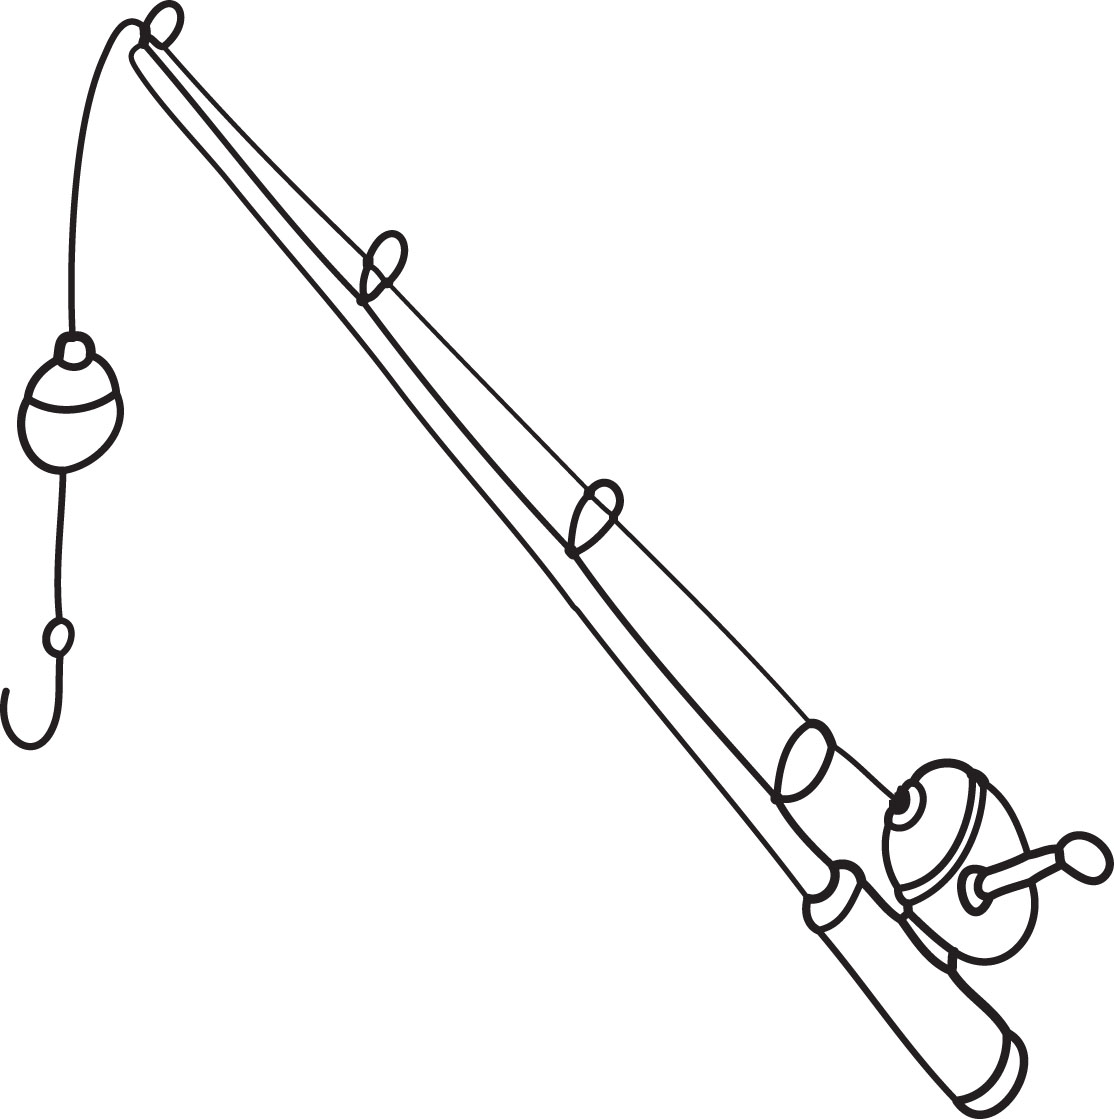 Fishing Pole Clip Art. Rating: Click Stars To Rate